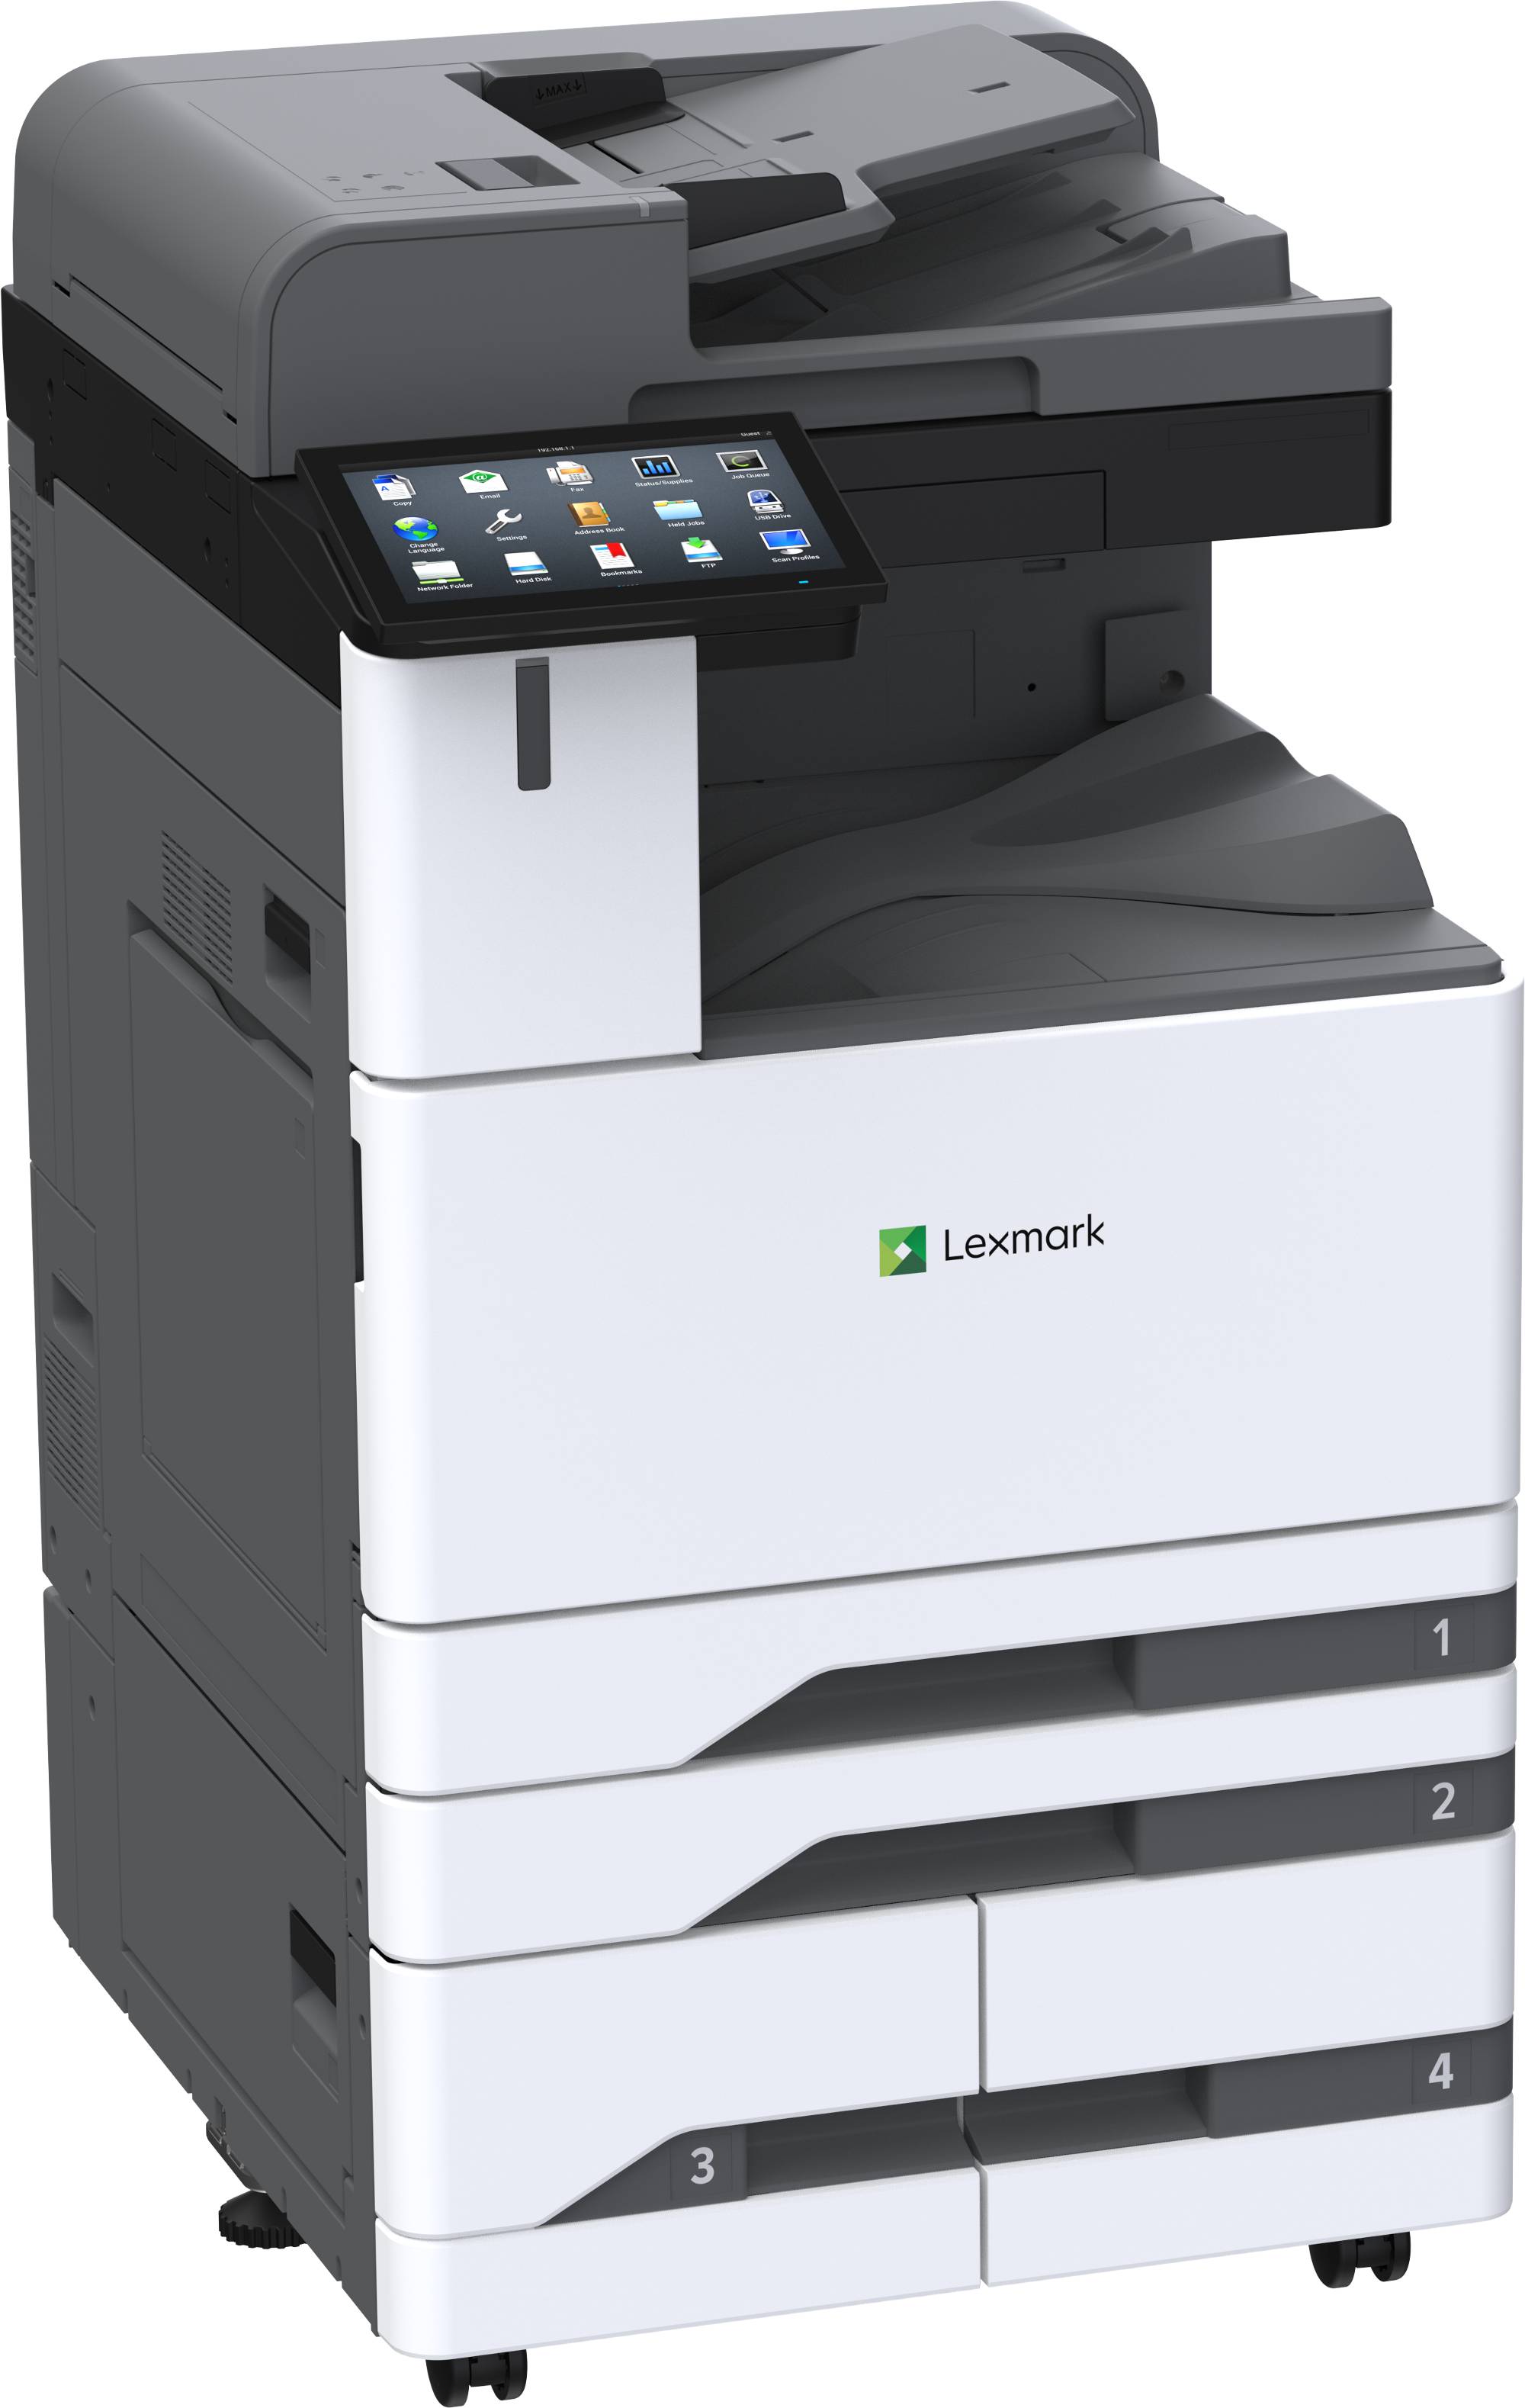 LEXMARK CX943ADXSE A3 COL MFP 55PPM 10IN TSCN 2X520SHT TRAY 130SHT DADF 1200DPI 1YR OS WTY image